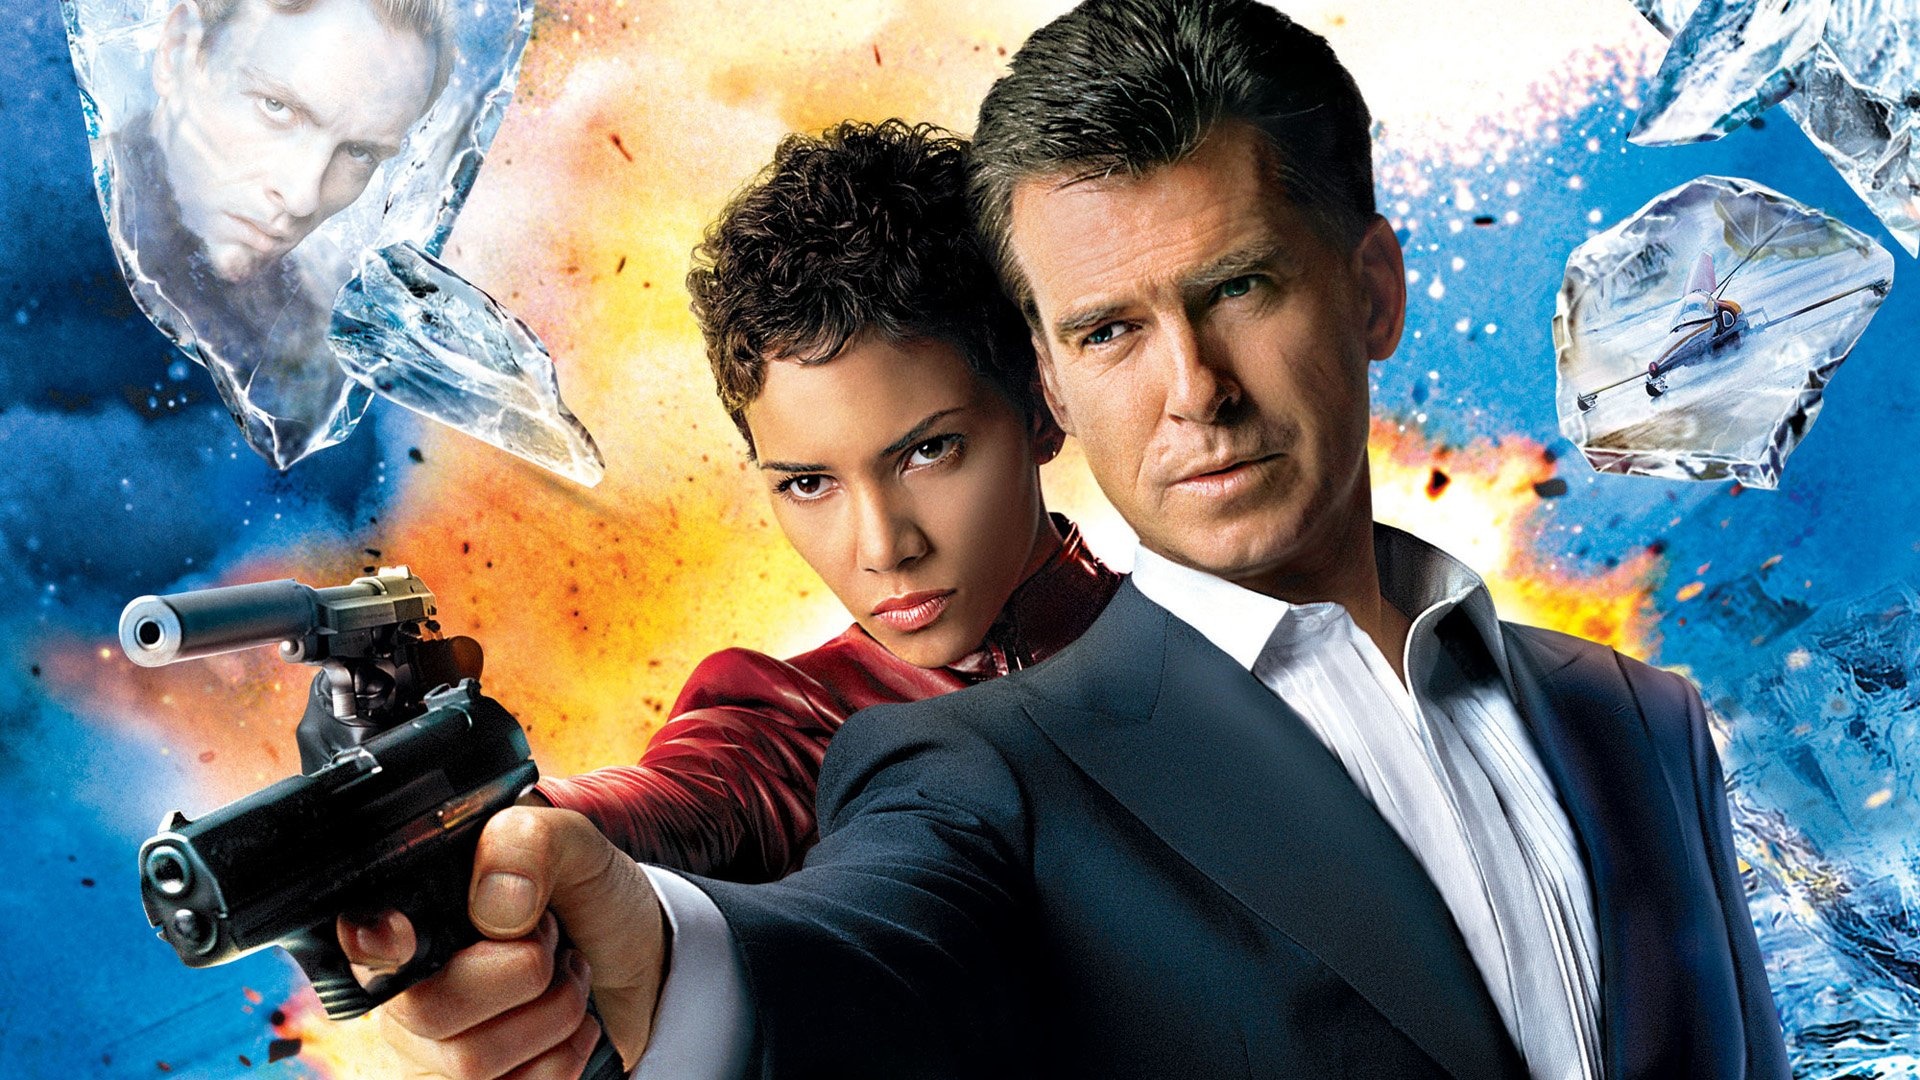 Pierce Brosnan, Die Another Day, Exciting action, Captivating performance, 1920x1080 Full HD Desktop